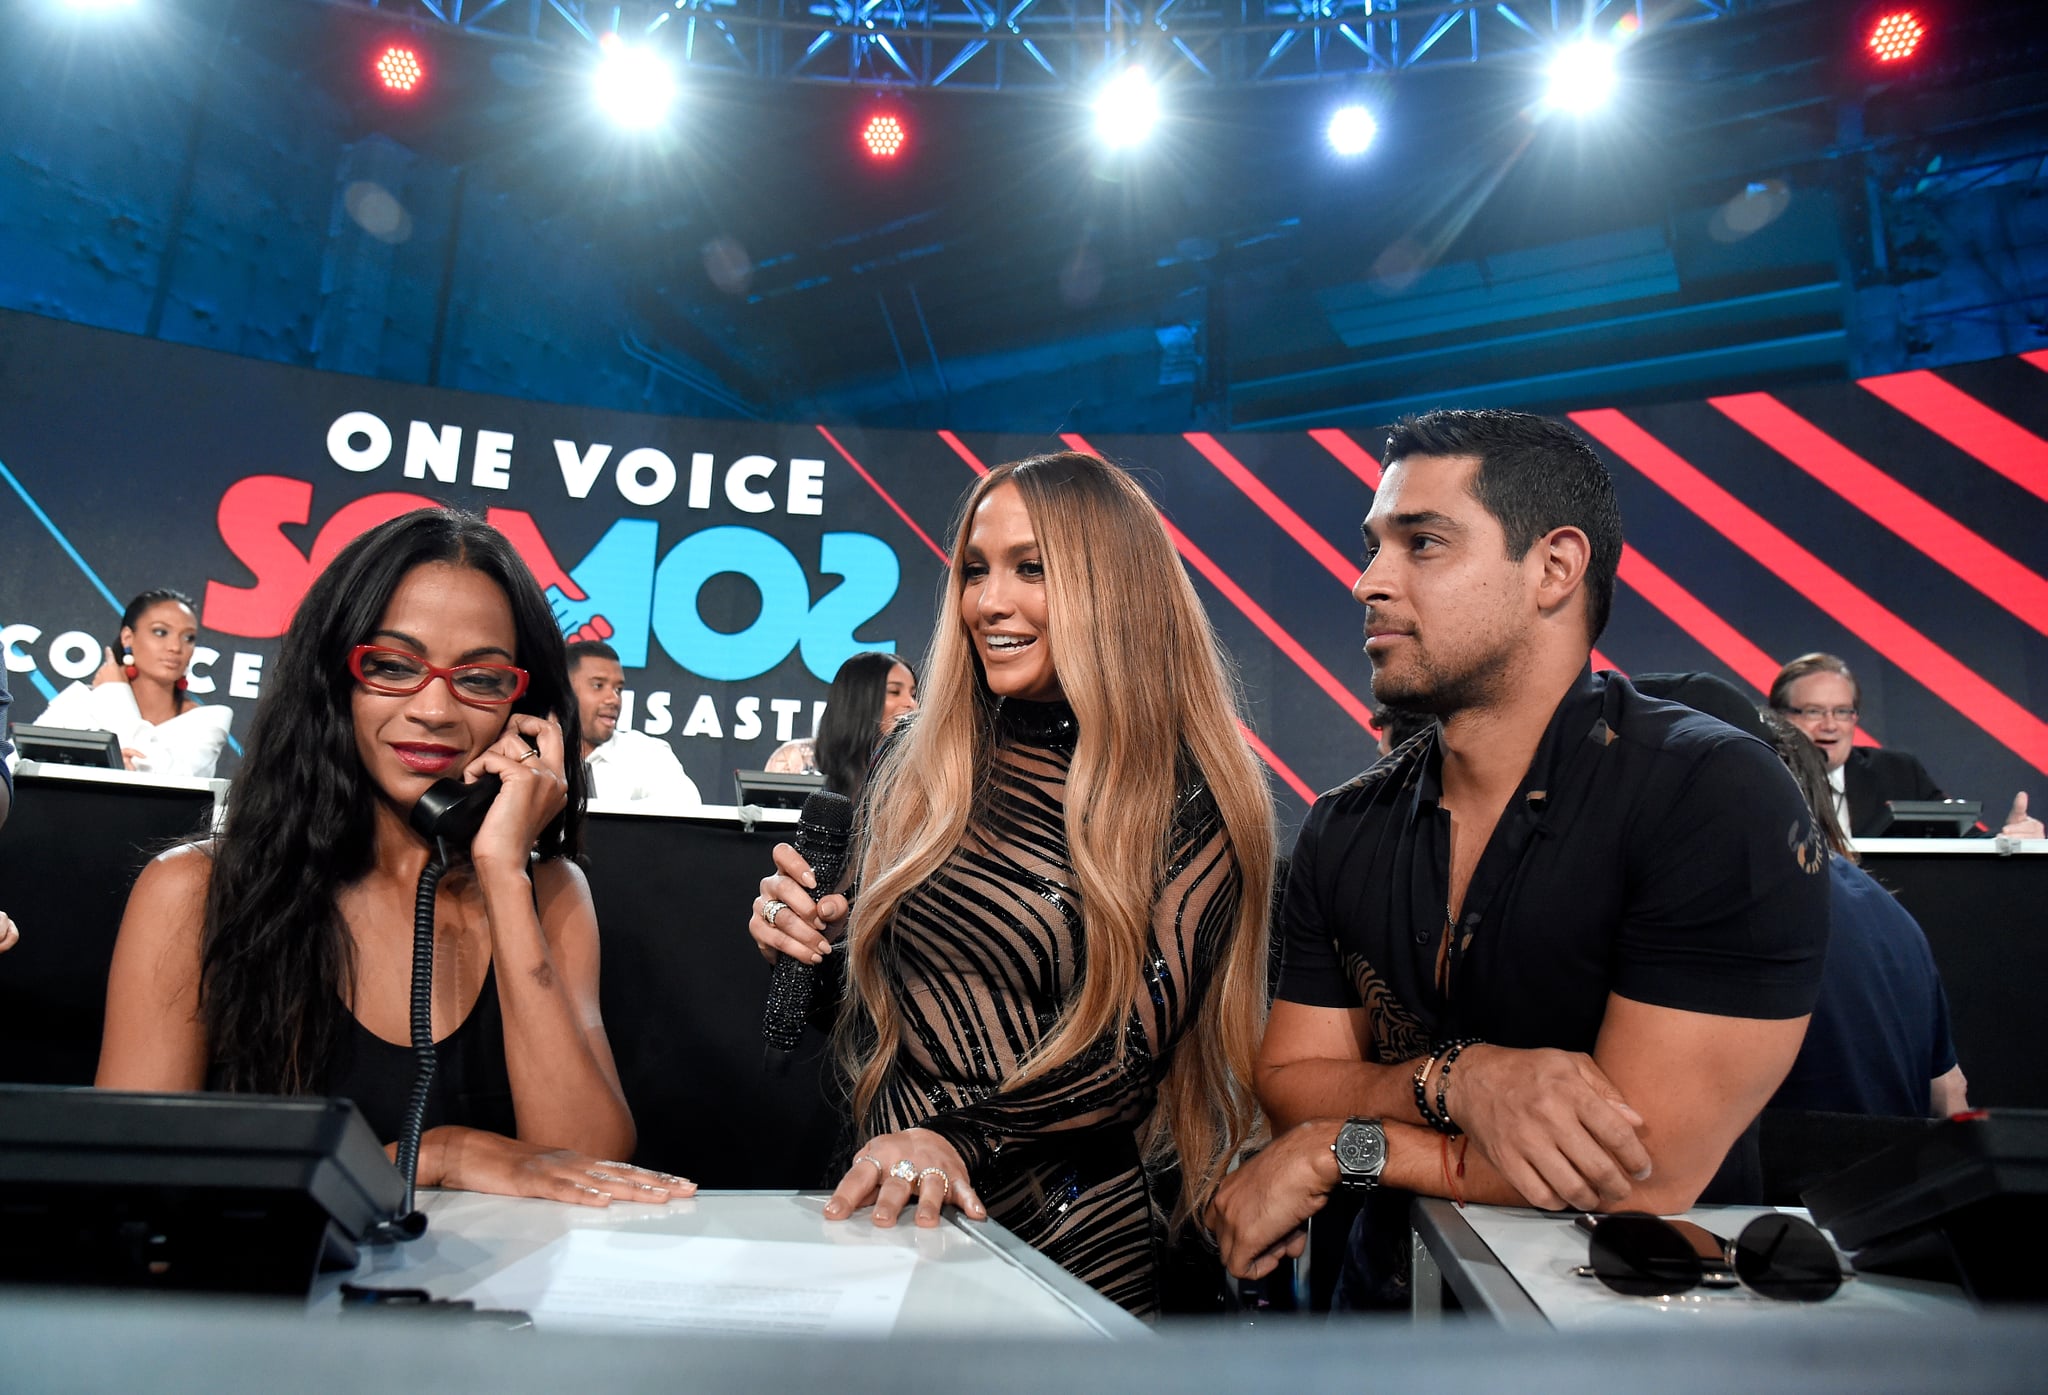 Jennifer Lopez checking in on Zoe Saldana and Wilmer Valderrama&#39;s | Jennifer  Lopez and Marc Anthony Brought a TON of Stars Together For One Voice: Somos  Live! | POPSUGAR Celebrity Photo 20